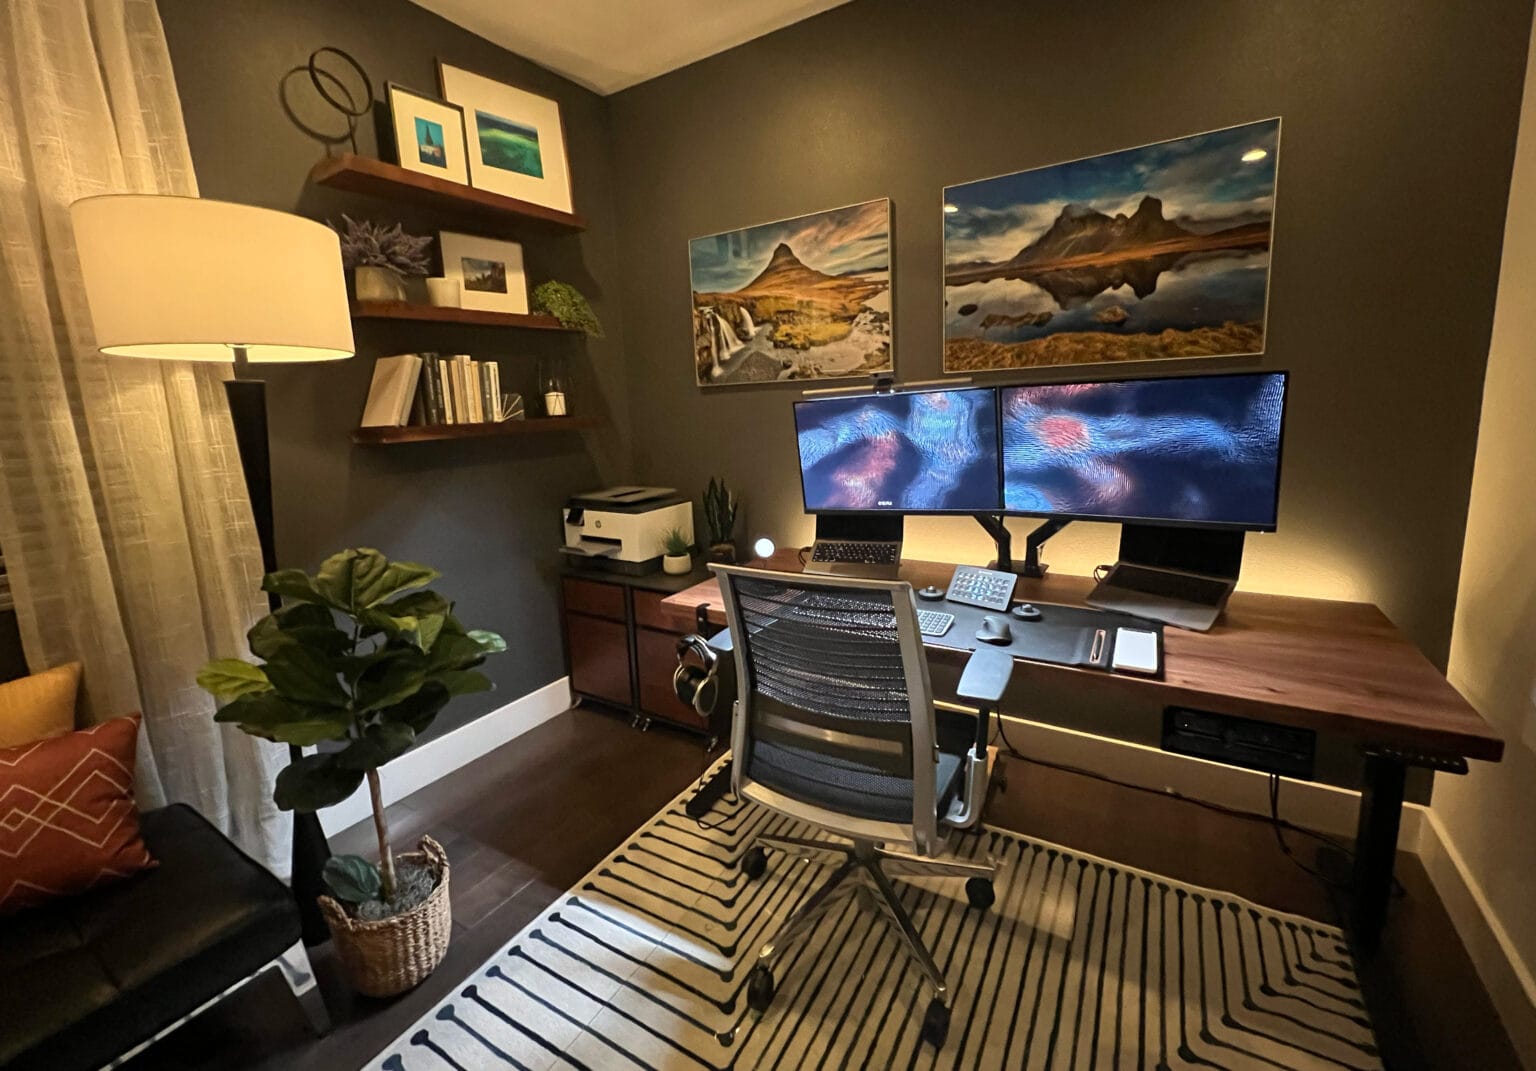 After seven years working at home, Derek Seaman built this computer setup.